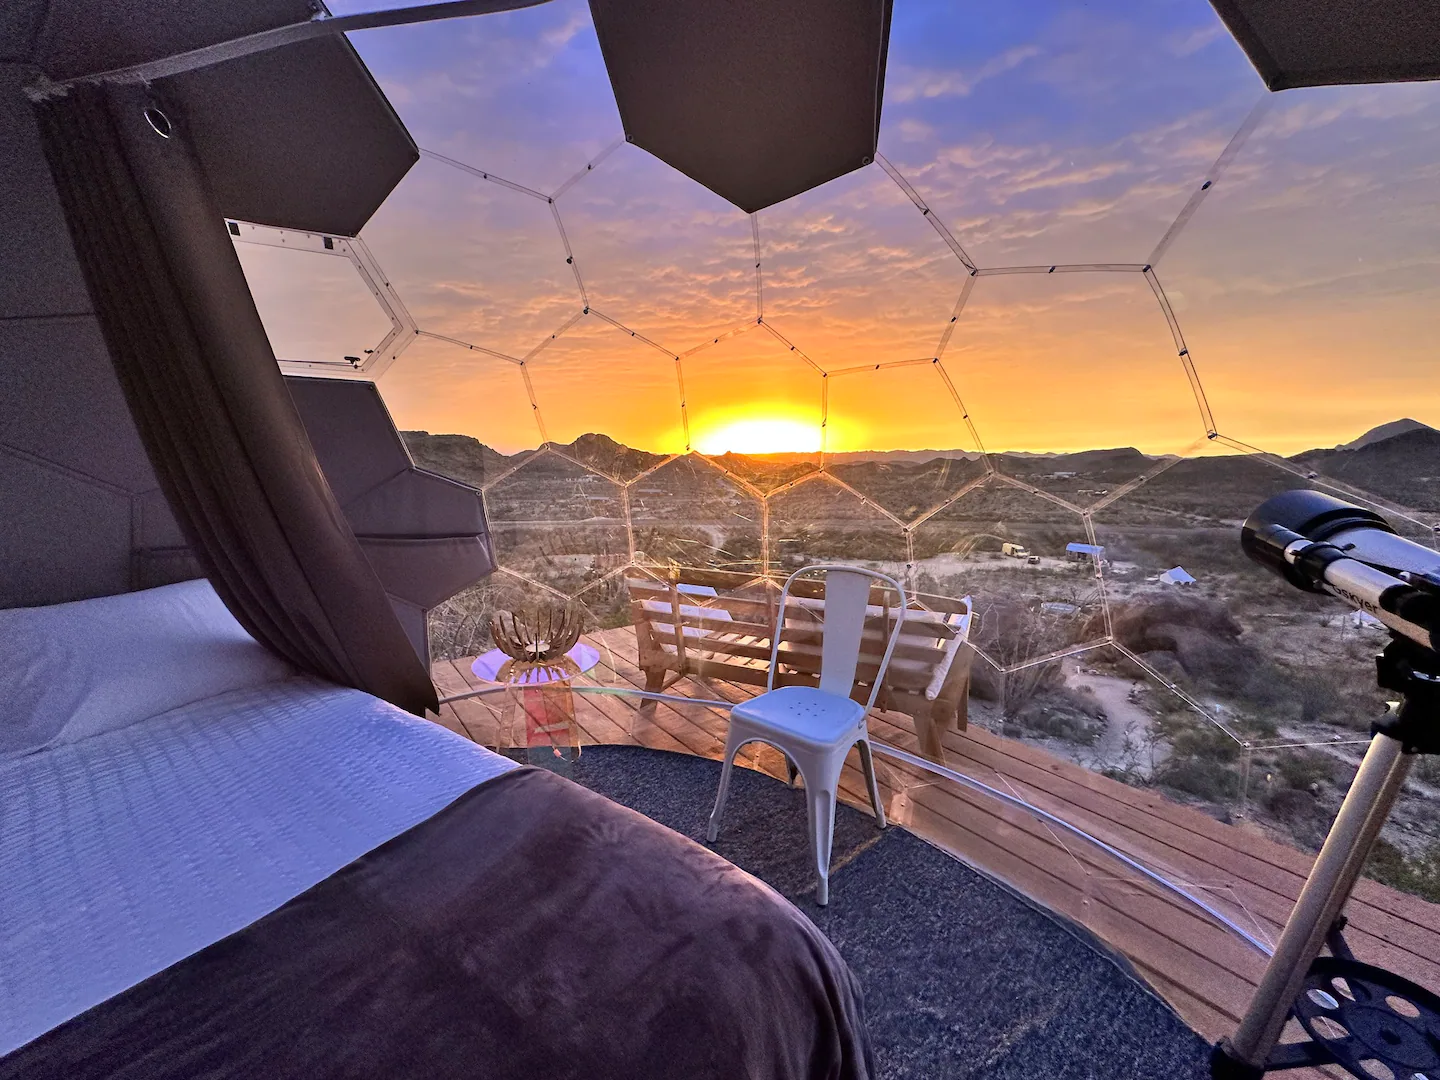 Space Cowboys Glamping Dome in Texas